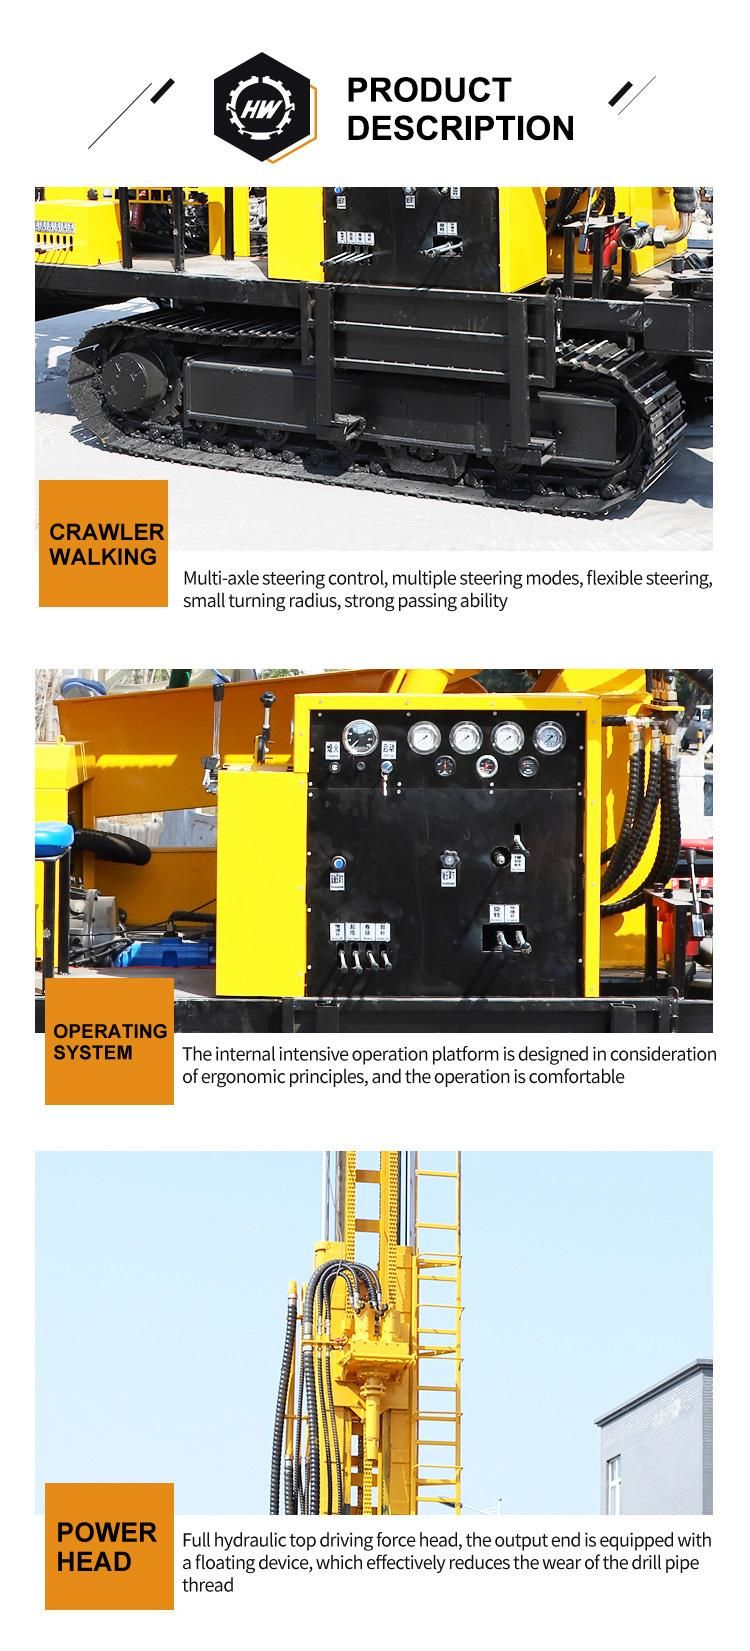 Pneumatically DTH Steel Crawler Drilling Depth 400-500 Meter Water Well Drilling Rig Machine